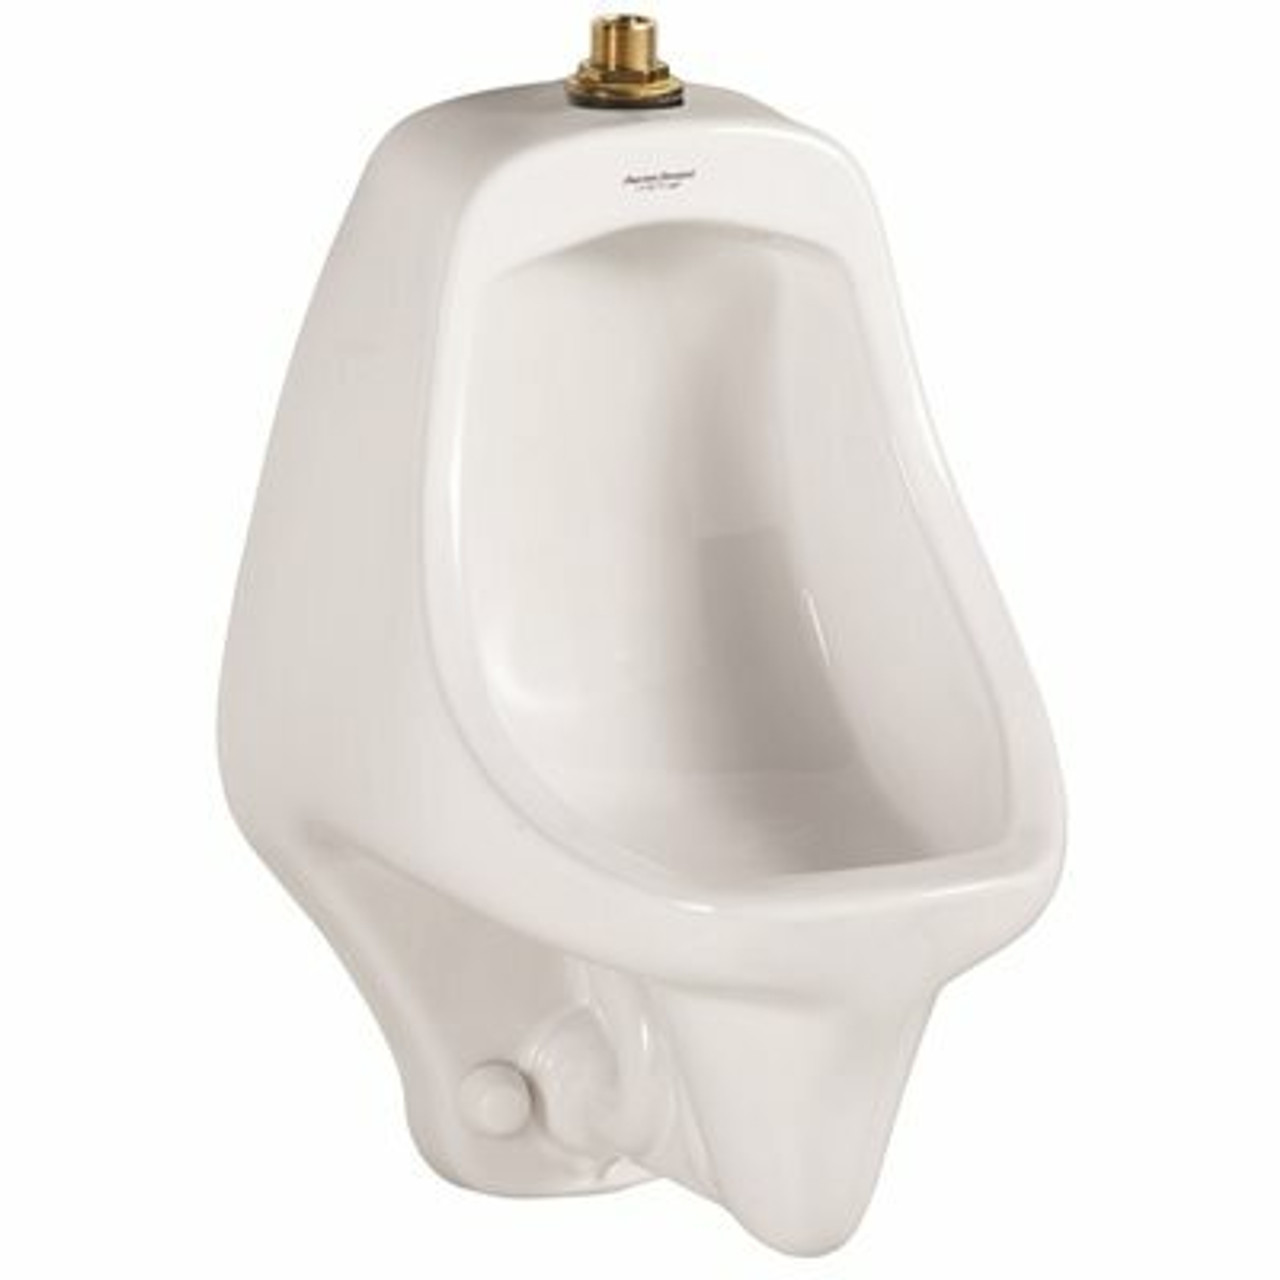 American Standard Allbrook Flowise Universal 0.5 Gpf Urinal In White